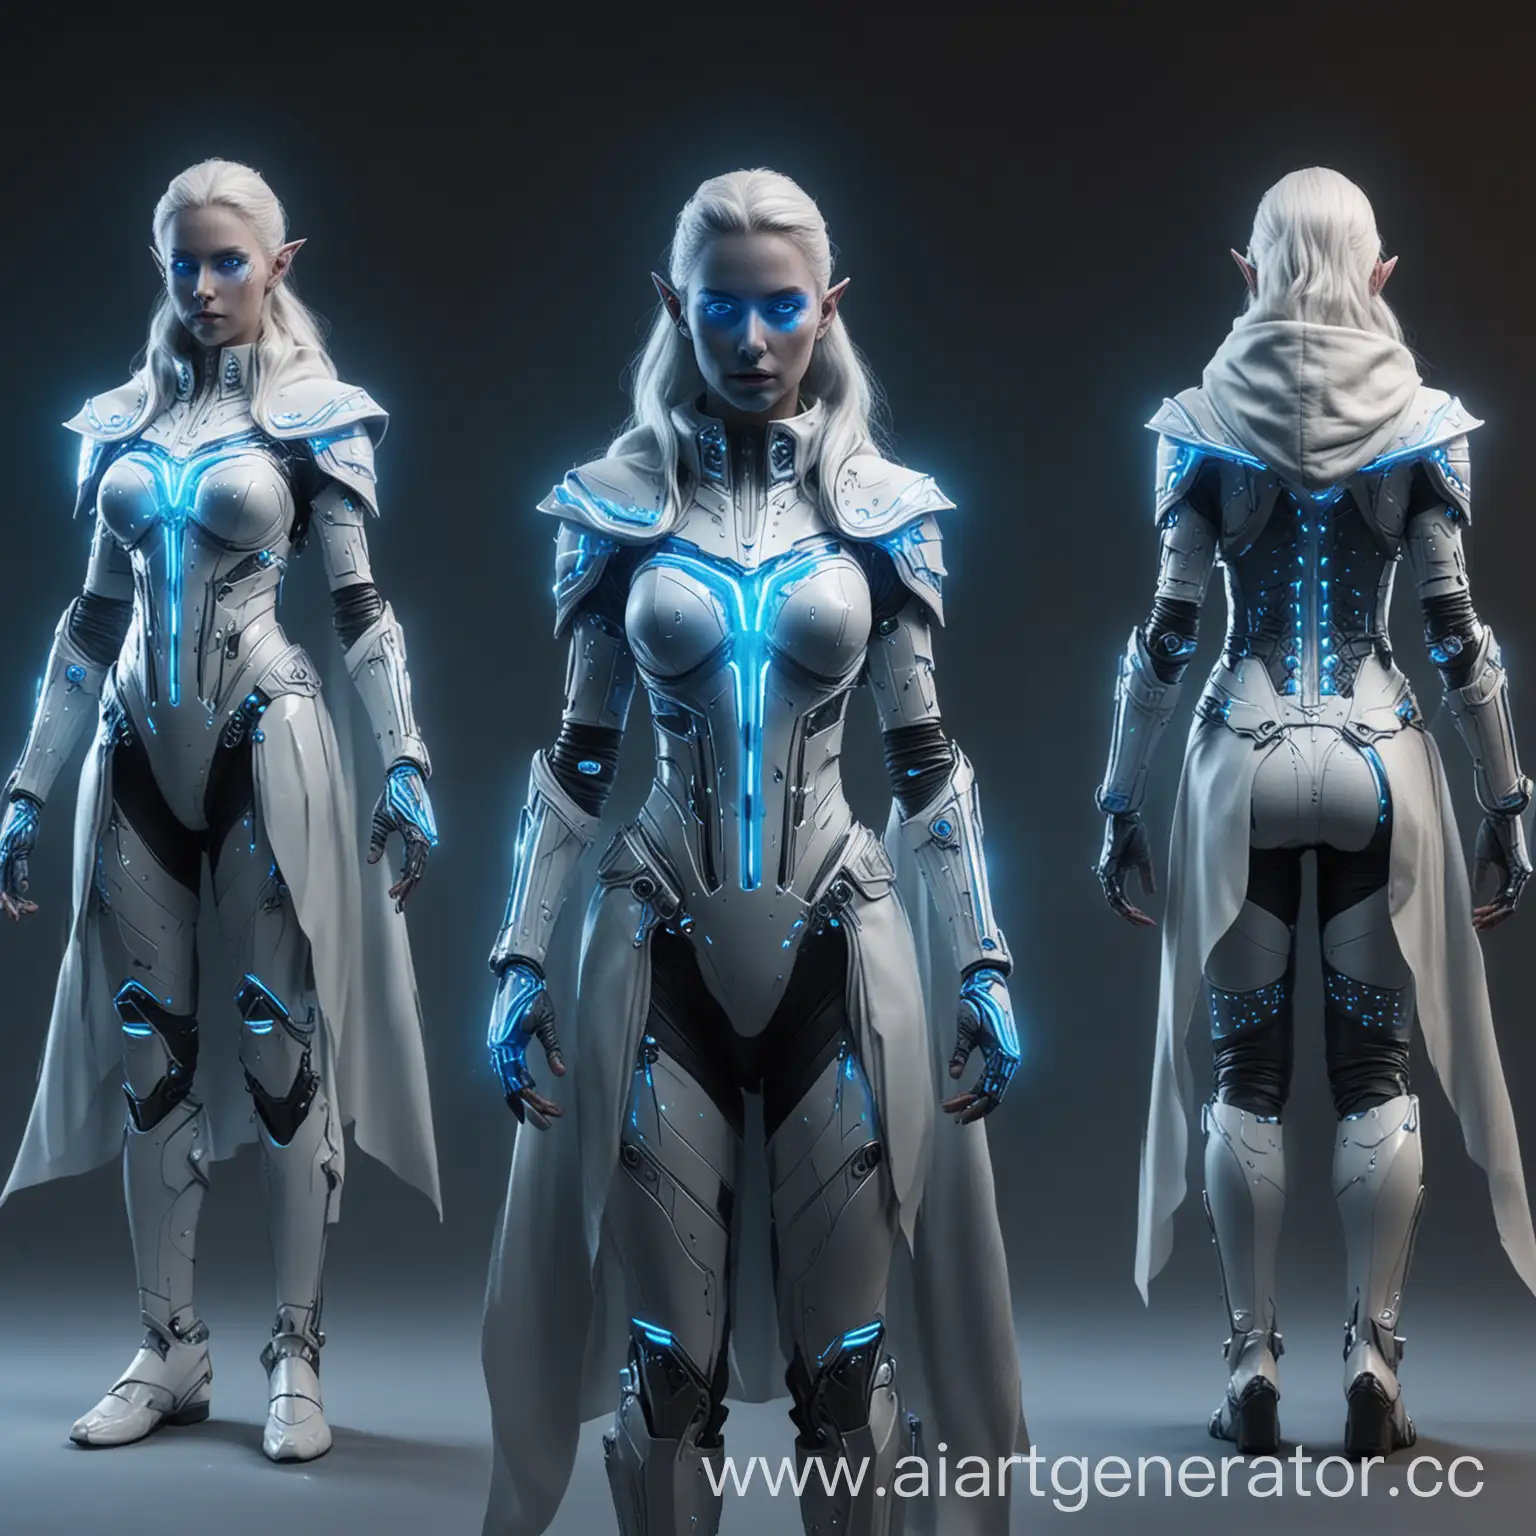 futuristic soldier elf in a white and electric blue glowing neon heavily armoured suit with a full face helmet wearing a long cloak front, side and back views